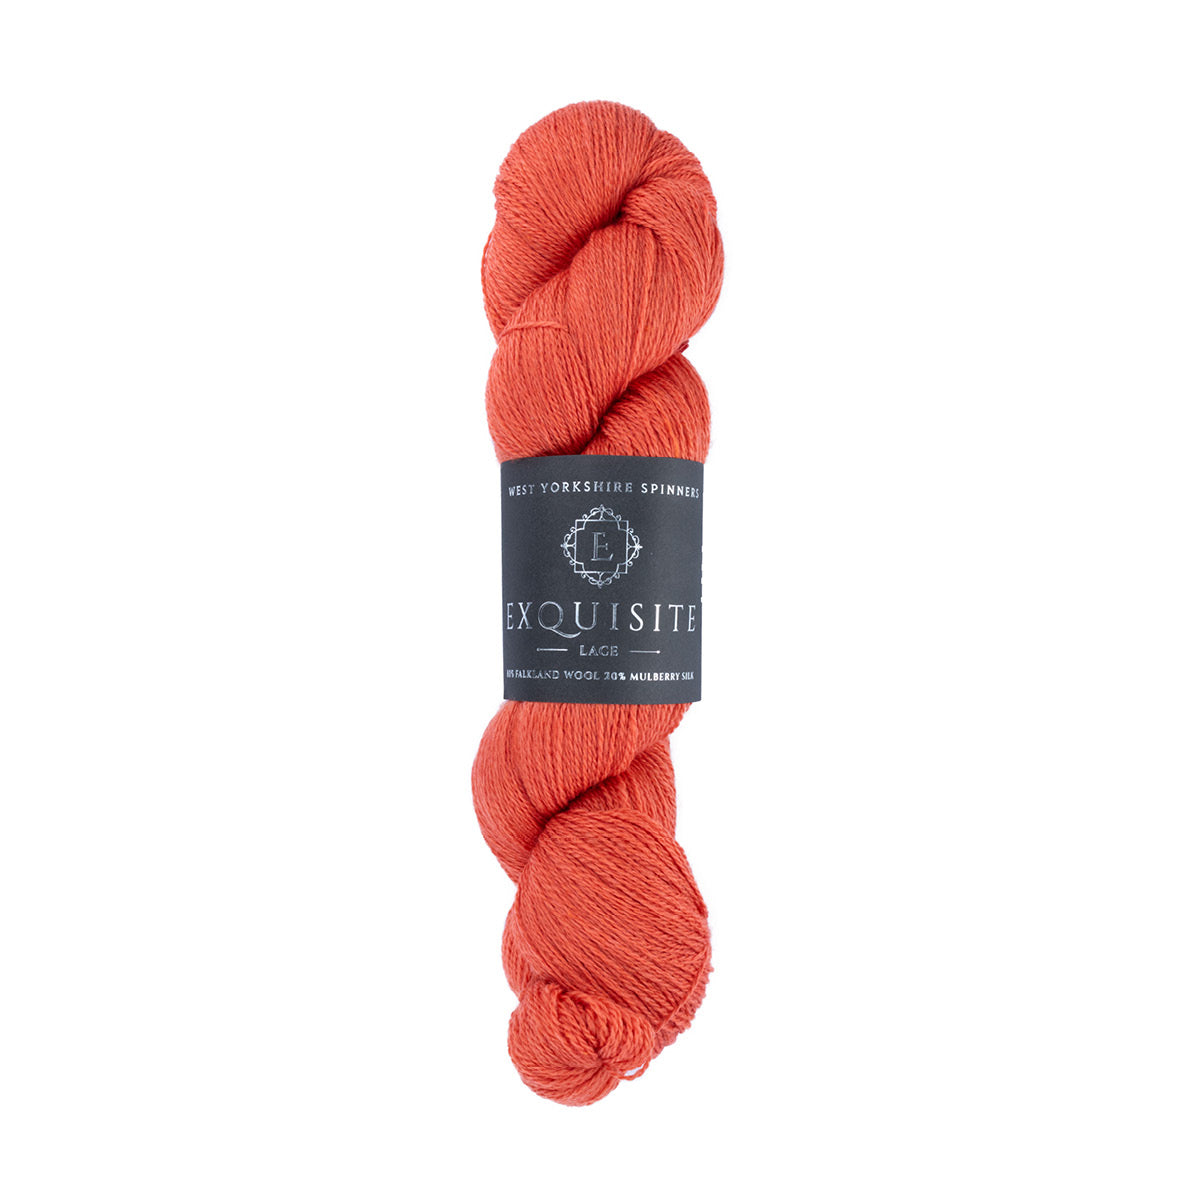 WYS West Yorkshire Spinners Exquisite Lace hank or skein in coral orange shade capri 520